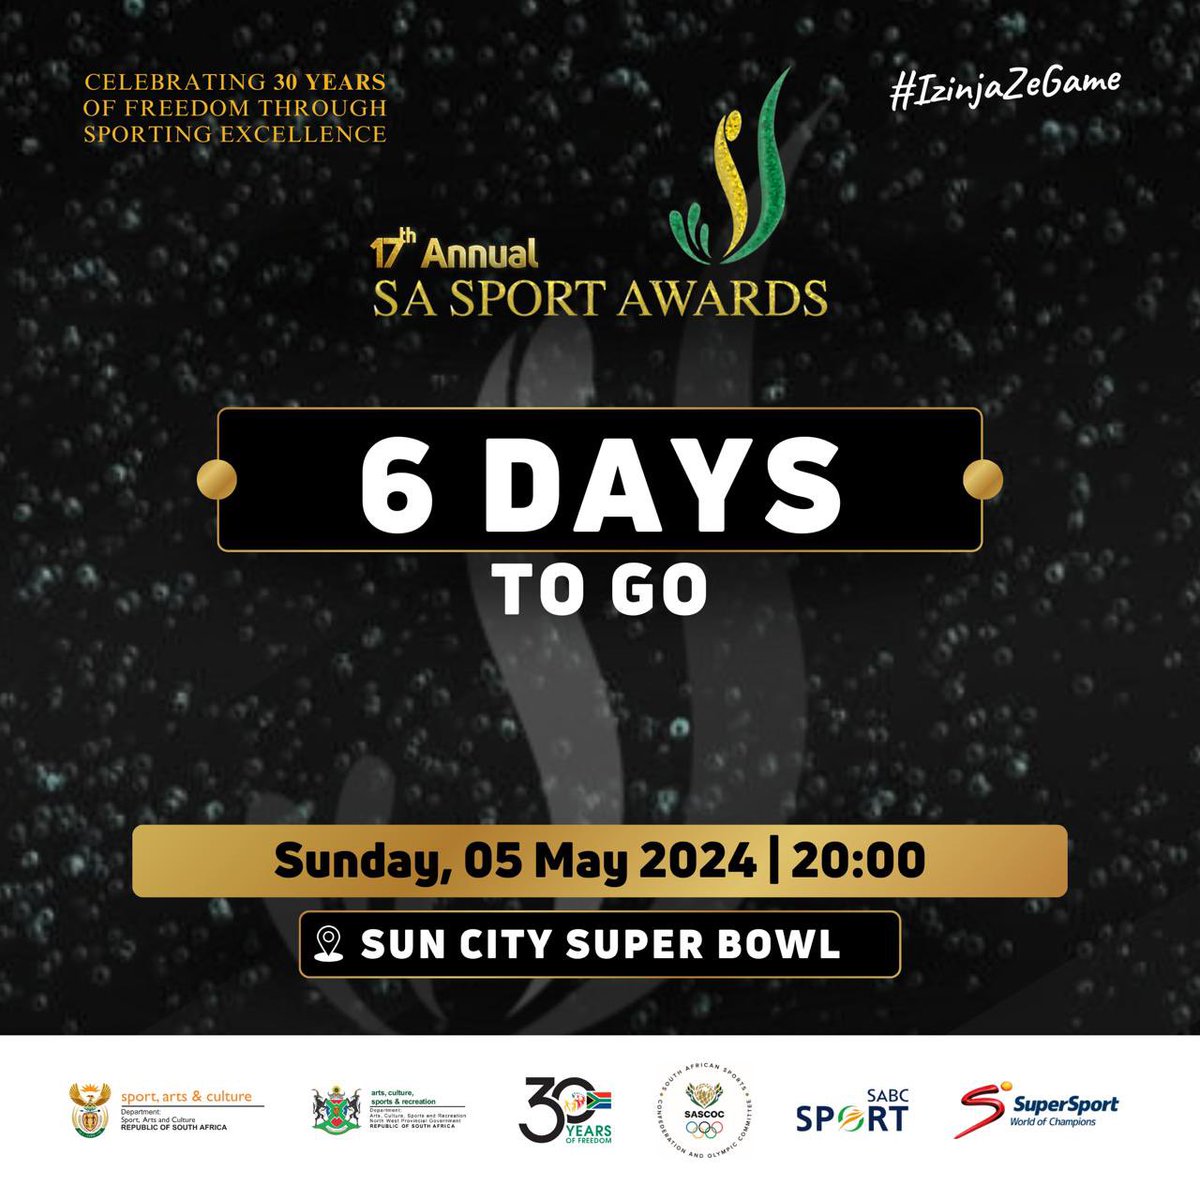 6 Days to go till the sports awards.

The 17th edition of the South African Sport Awards (SASA) are themed “Celebrating 30 years of freedom through sporting excellence”. 

#SASA17Edition on Sunday, 5 May 2024 at Sun City Superbowl, NW

#IzinjaZeGame
#InspiringANationOfWinners